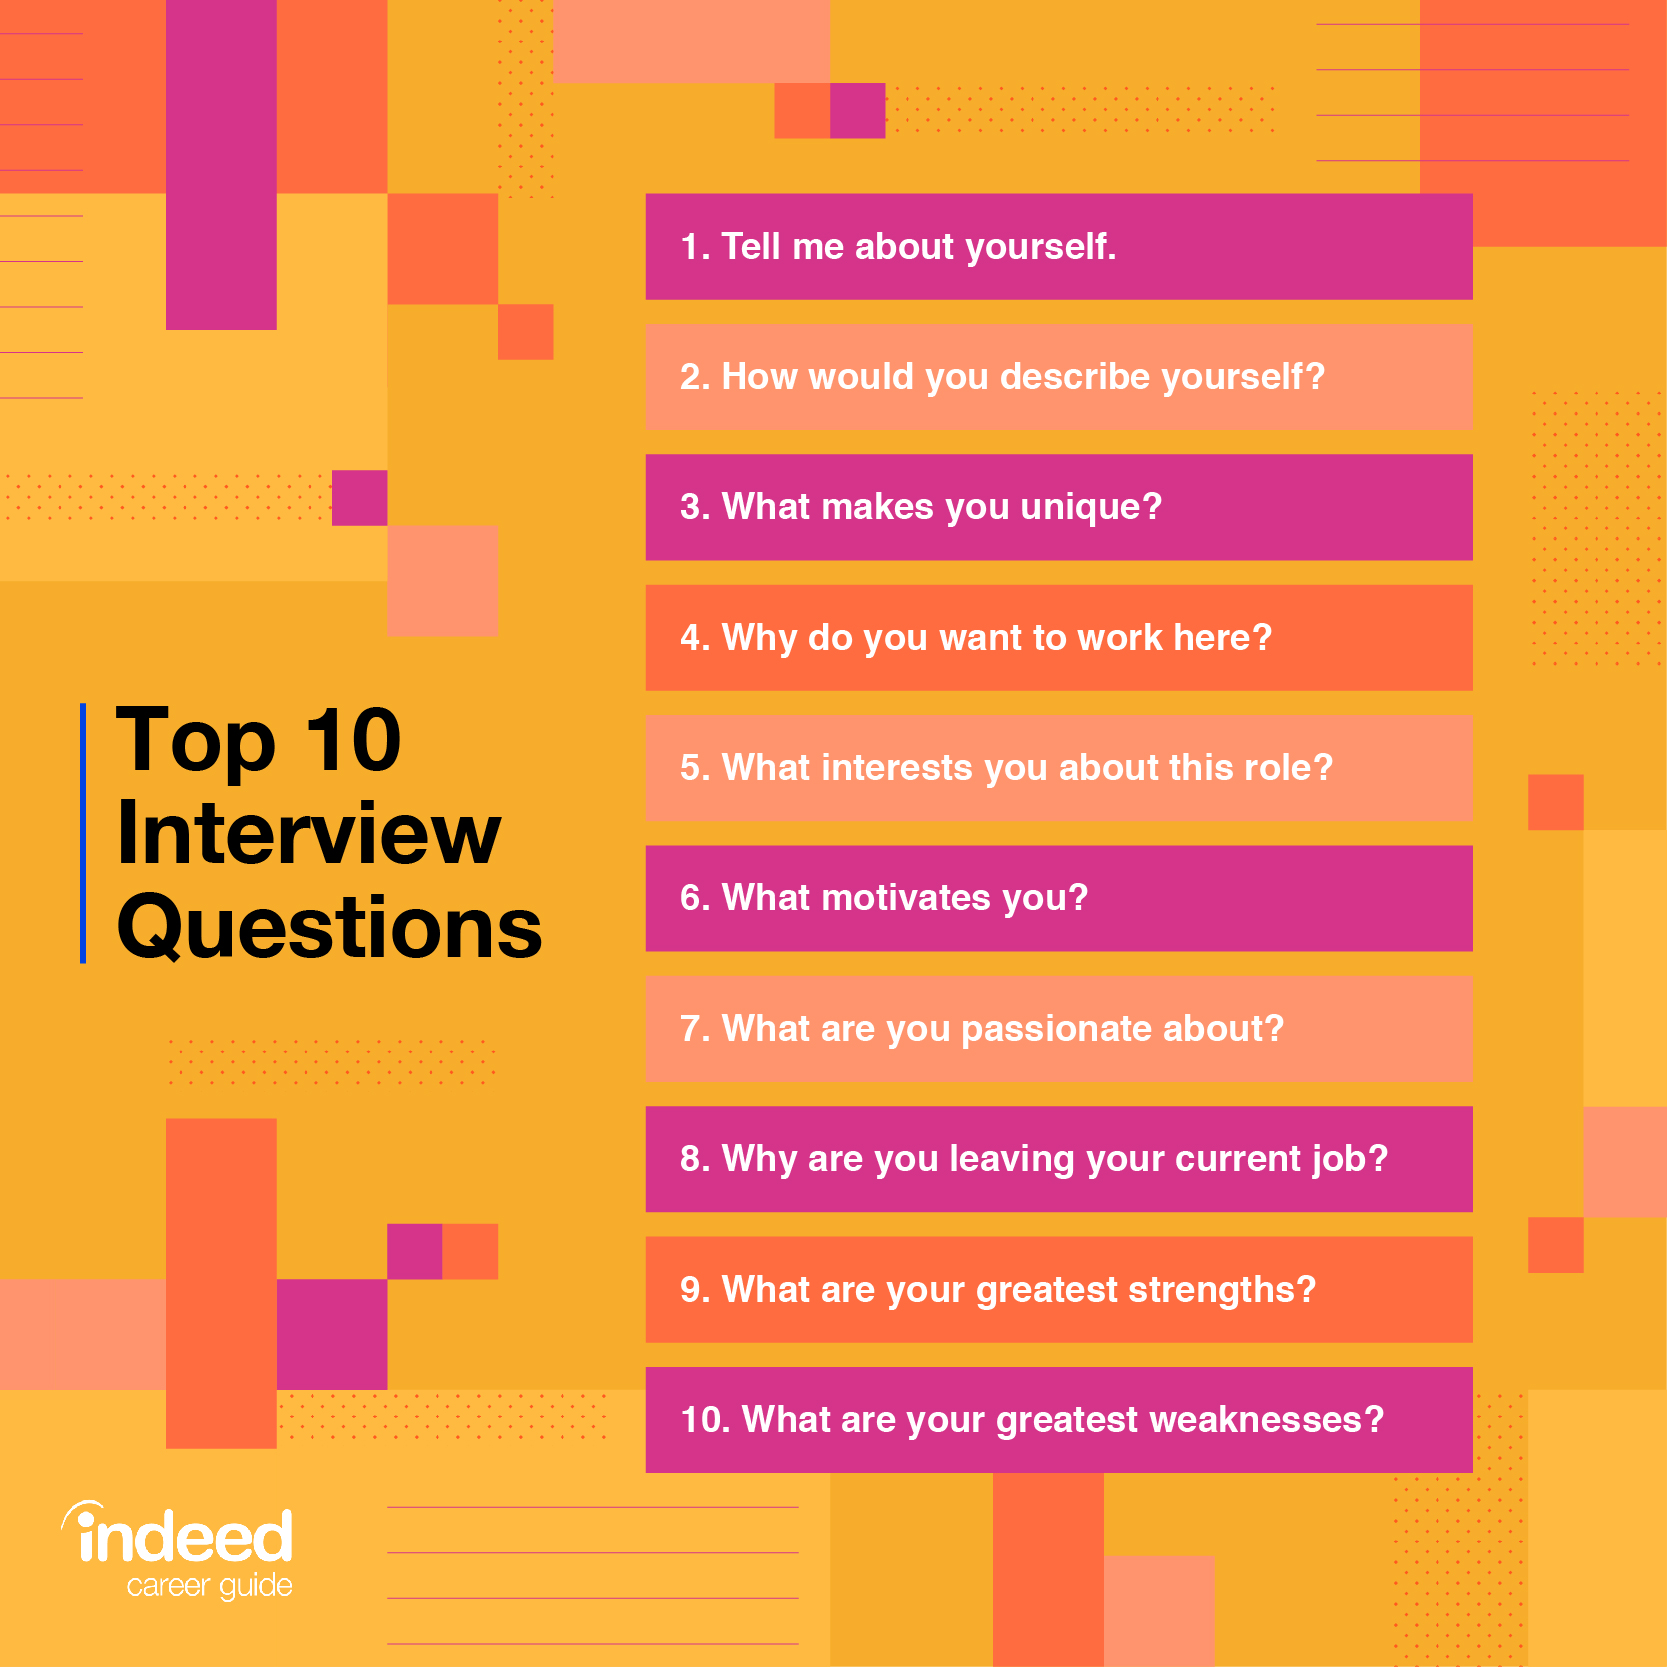 40 Engineering Interview Questions To Help You Prepare With Example Answers Indeed Com